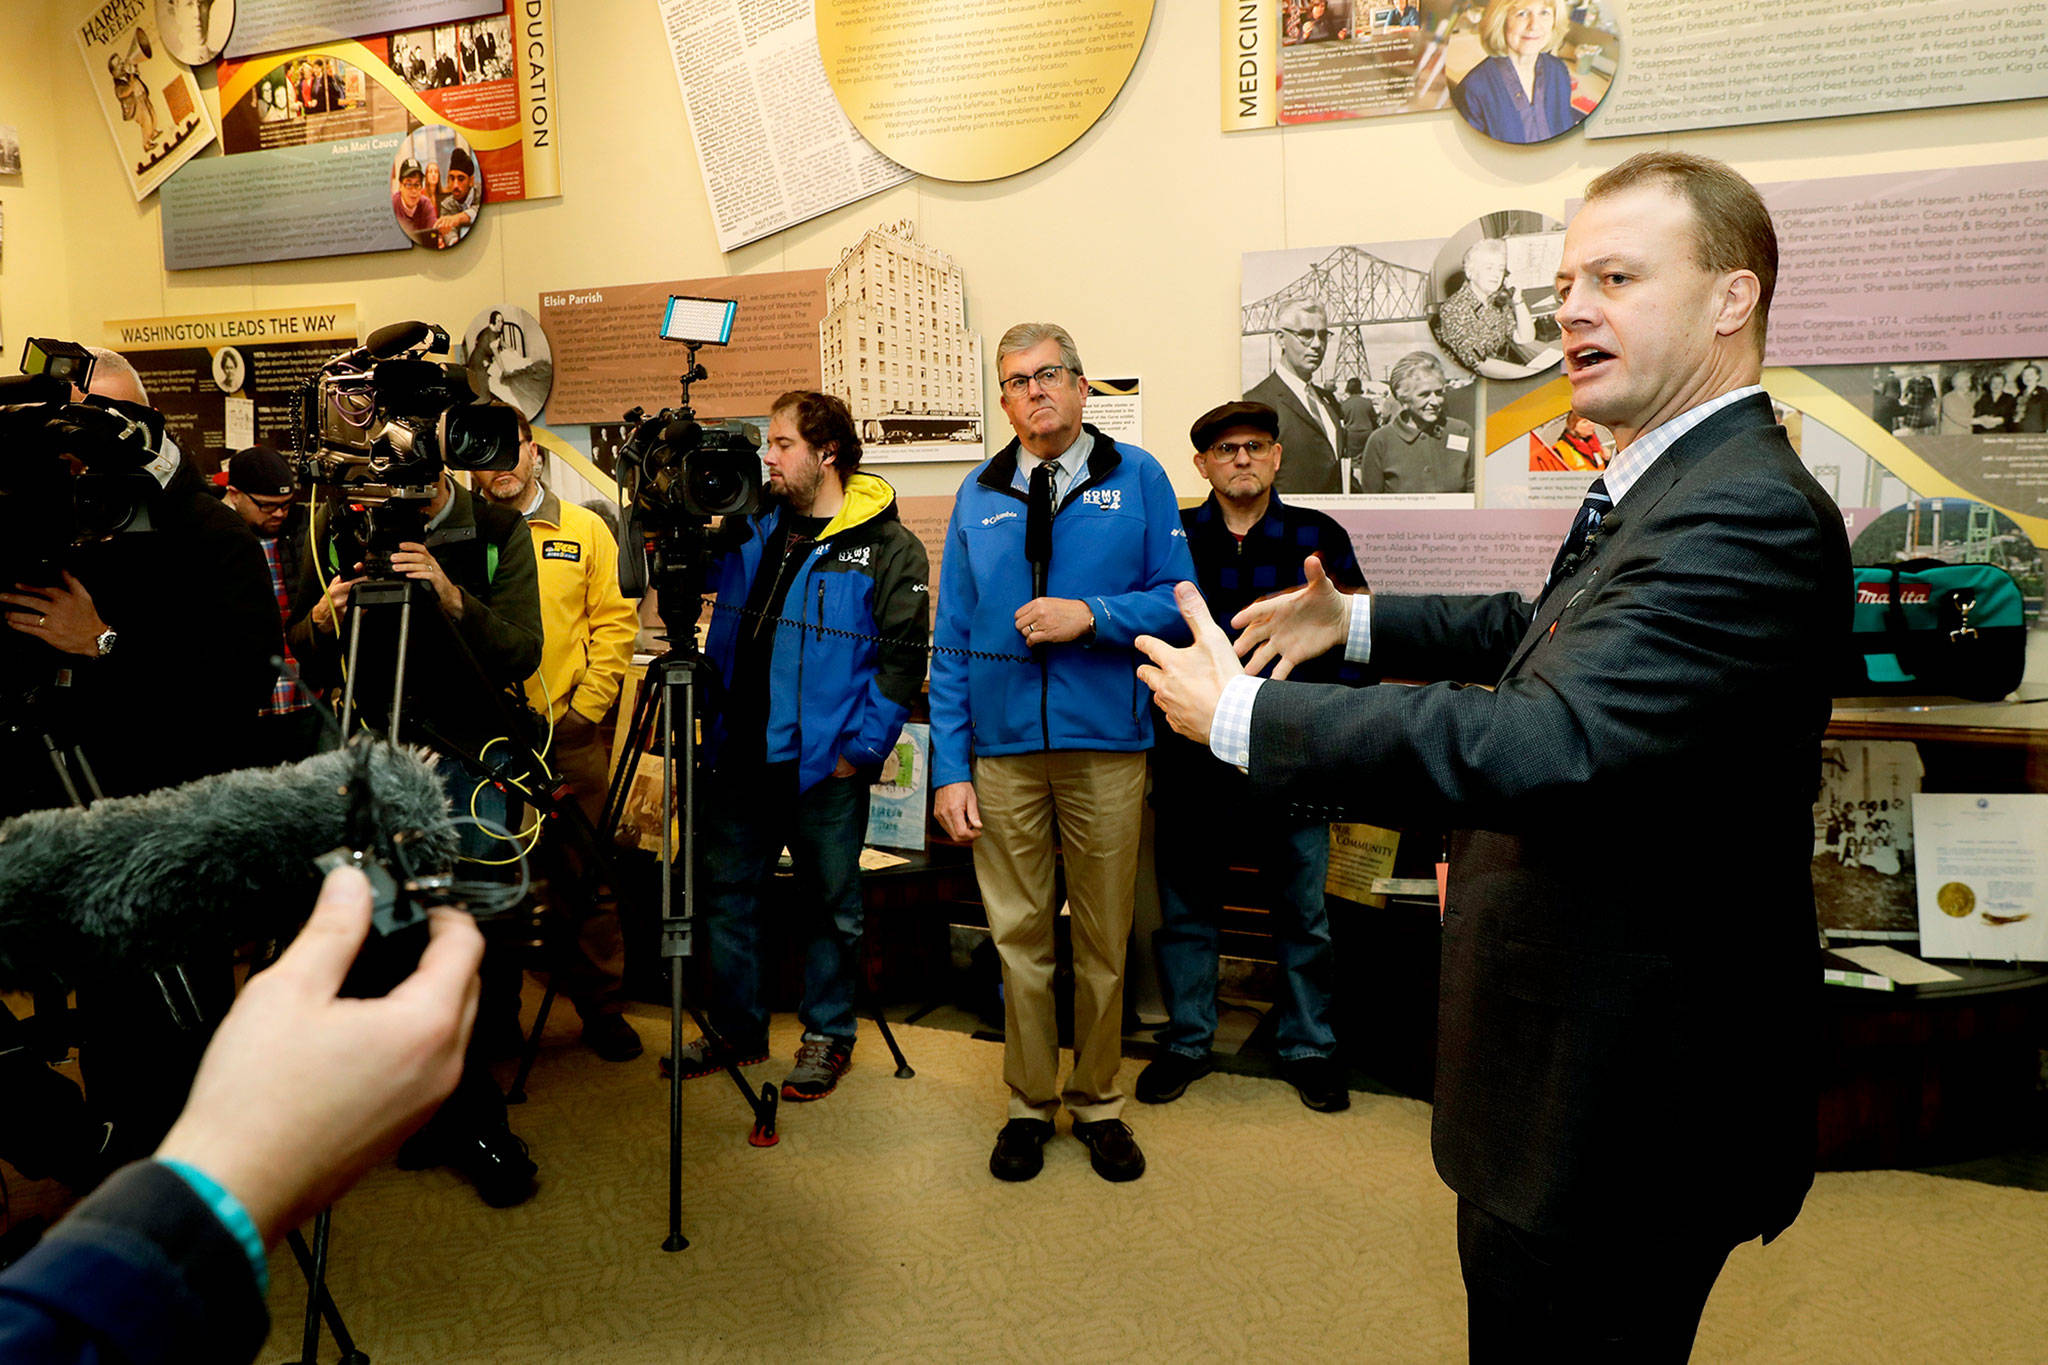 Tim Eyman (right), a career anti-tax initiative promoter, talks to reporters Monday at the Capitol in Olympia. He was there to officially announce his entry in the 2020 governor’s race, as an independent. (AP Photo/Ted S. Warren)